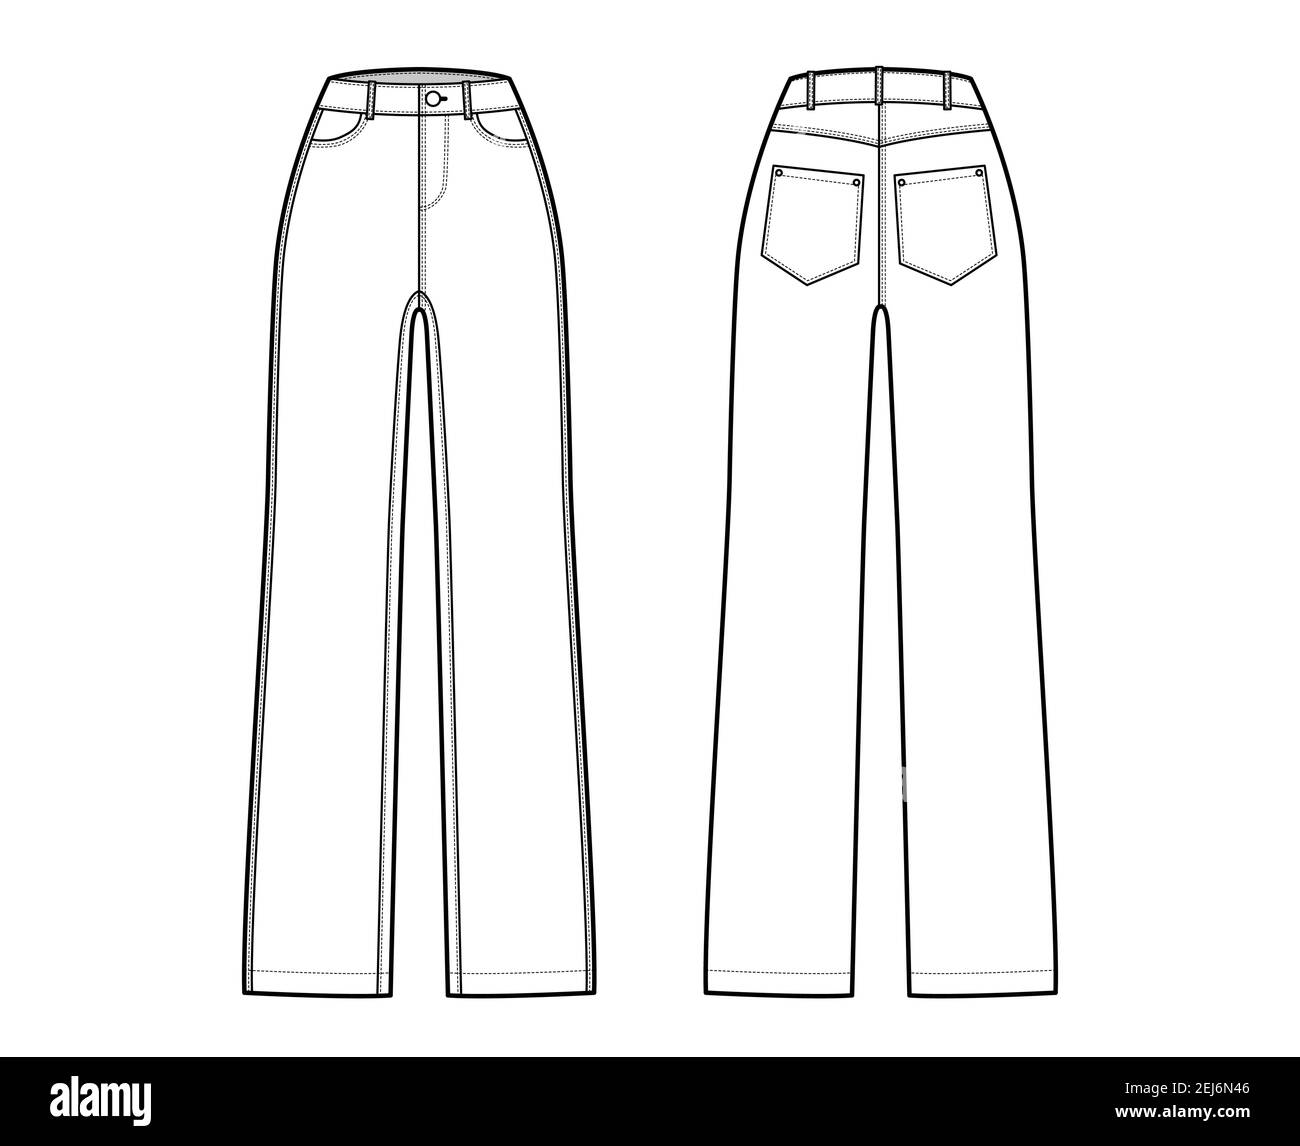 Straight Jeans Denim pants technical fashion illustration with full ...